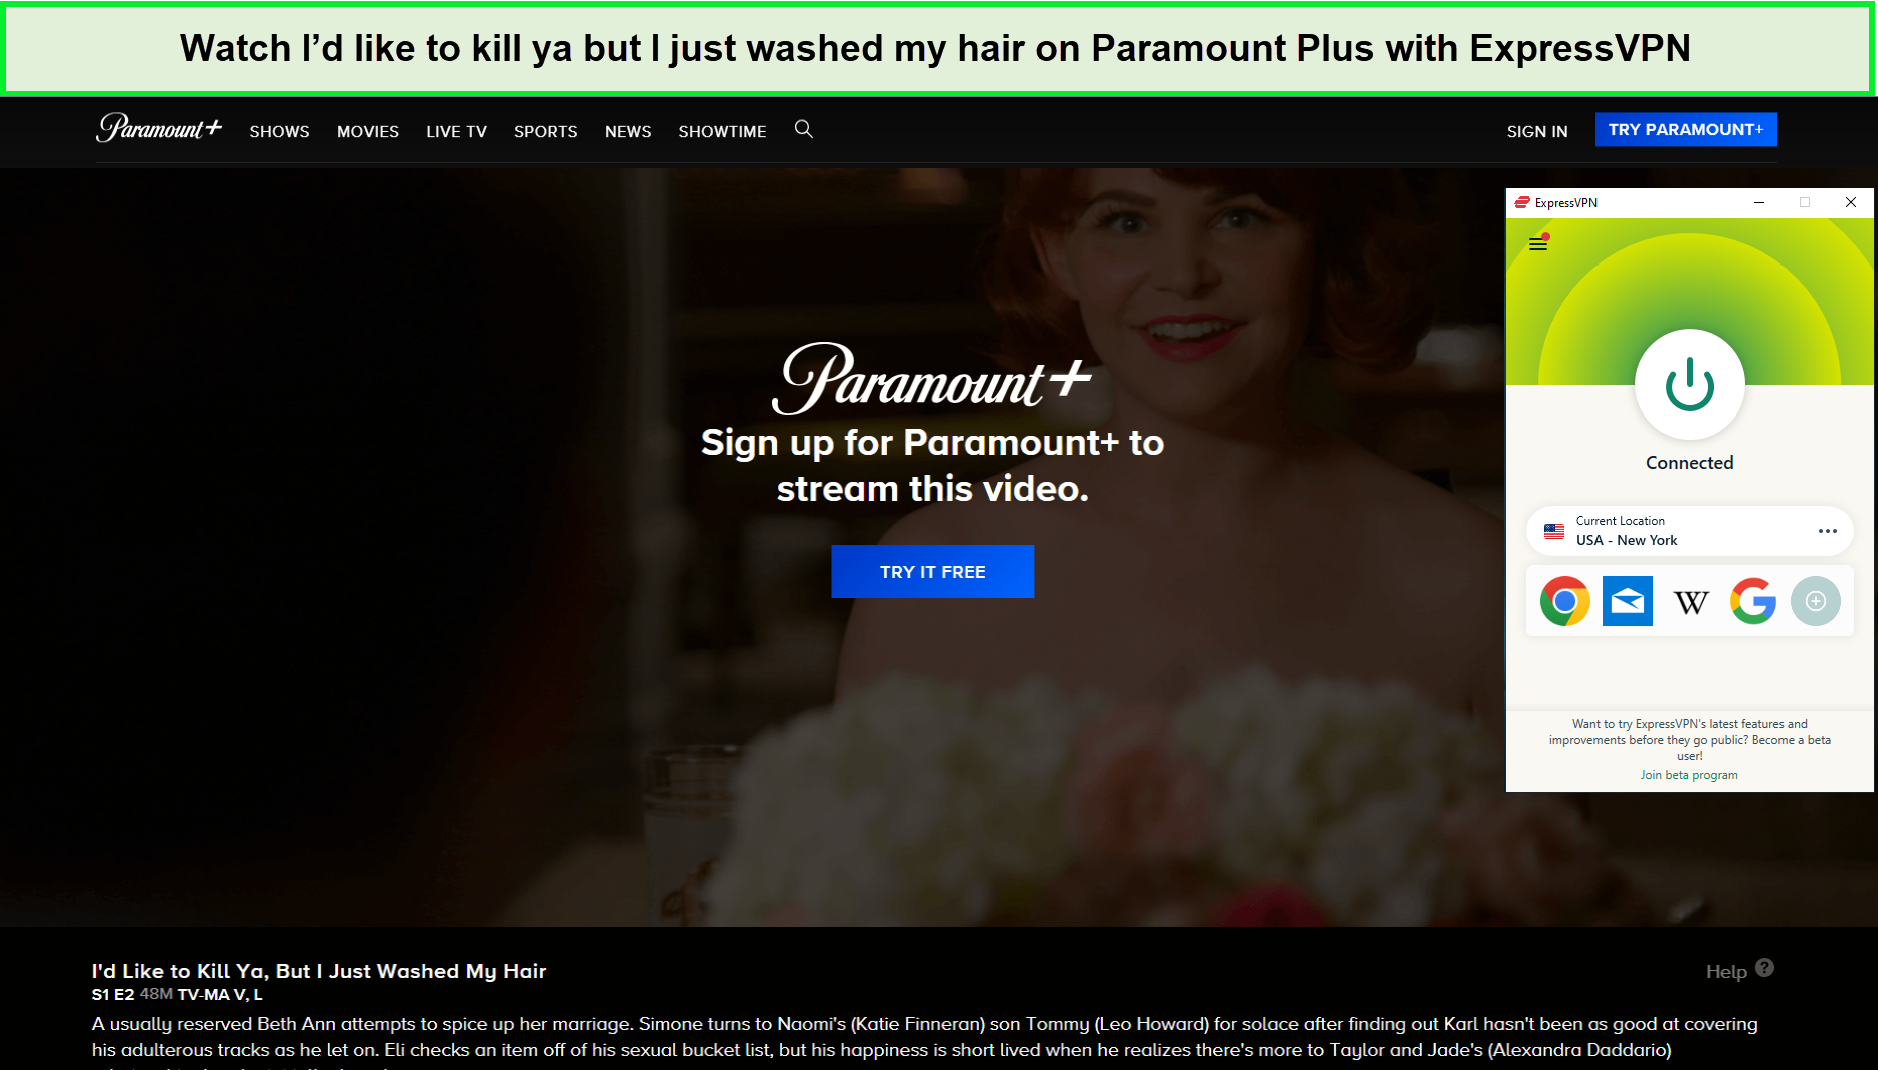 Watch-Id-like-to-kill-ya-but-I-just-washed-my-hair-in-Spainon-Paramount-Plus-with-ExpressVPN